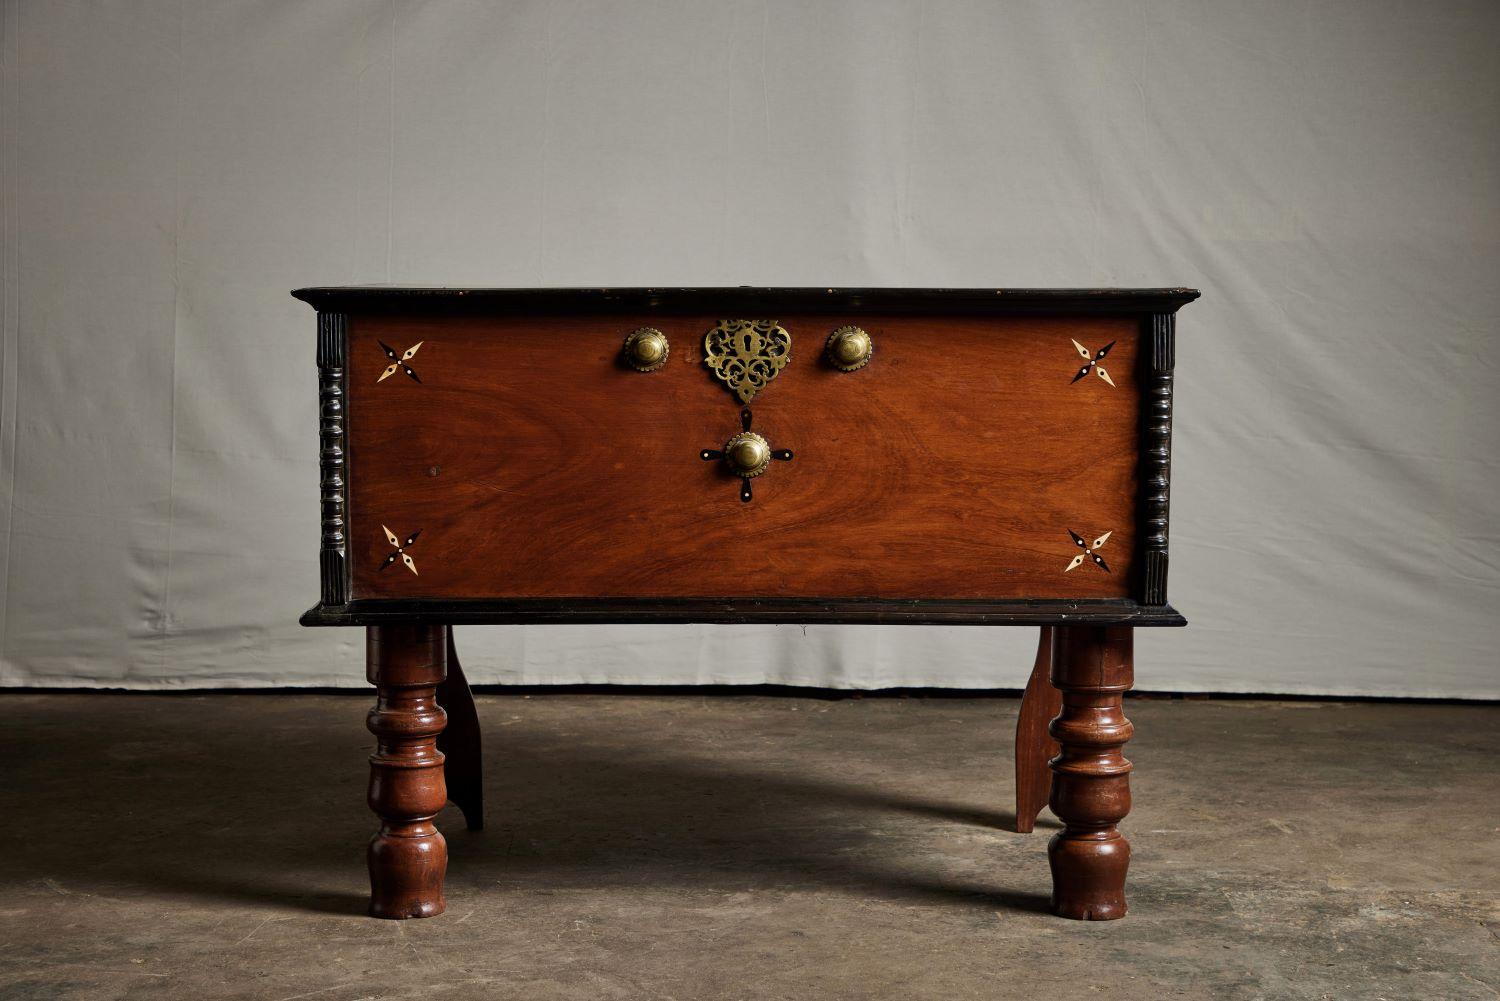 A handsome 19th century British Colonial trunk from Sri Lanka that features beautiful inlay detailing on the face and carved columns on the sides of the trunk. It also features beautiful brass hardware.